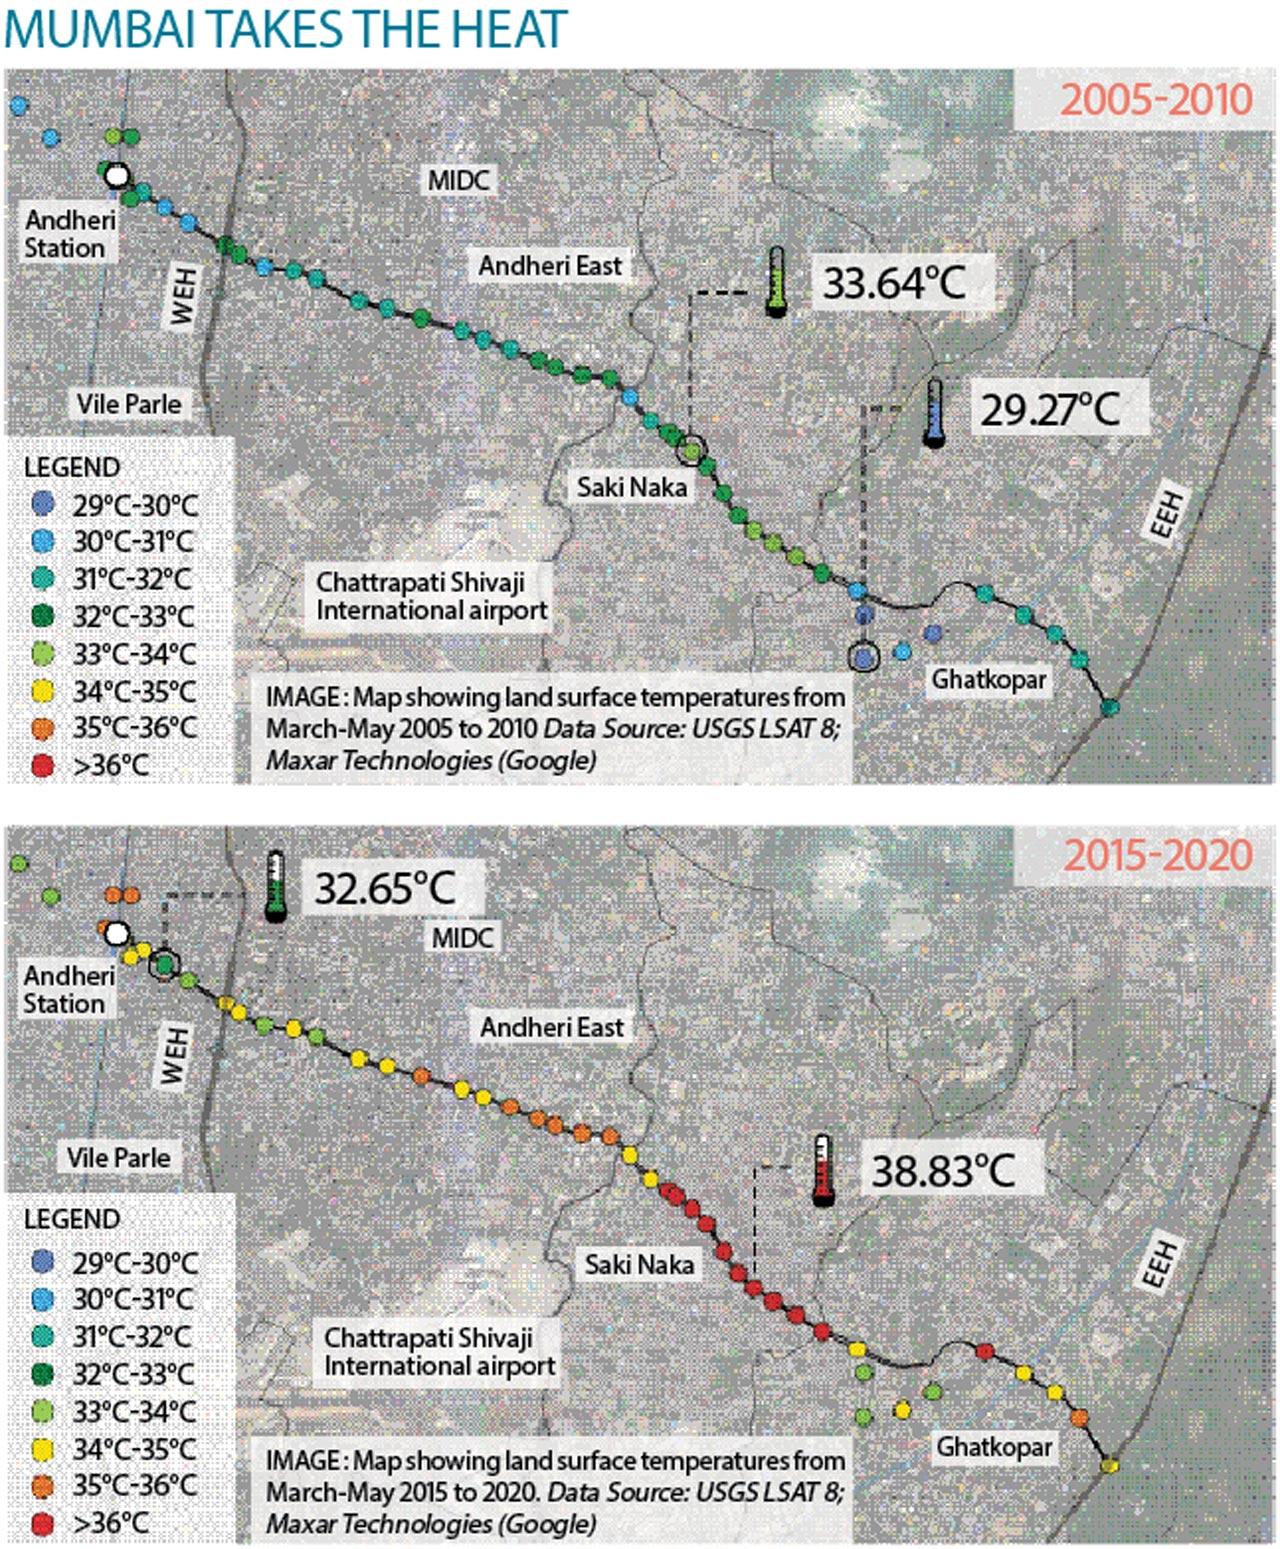 Land surface temperature increase over 10 years (range from 2005-2010 [top] and 2015-2020 [bottom]) along Andheri-Ghatkopar link road due to heat island effect. Courtesy/Mumbai Climate Action Plan 2022